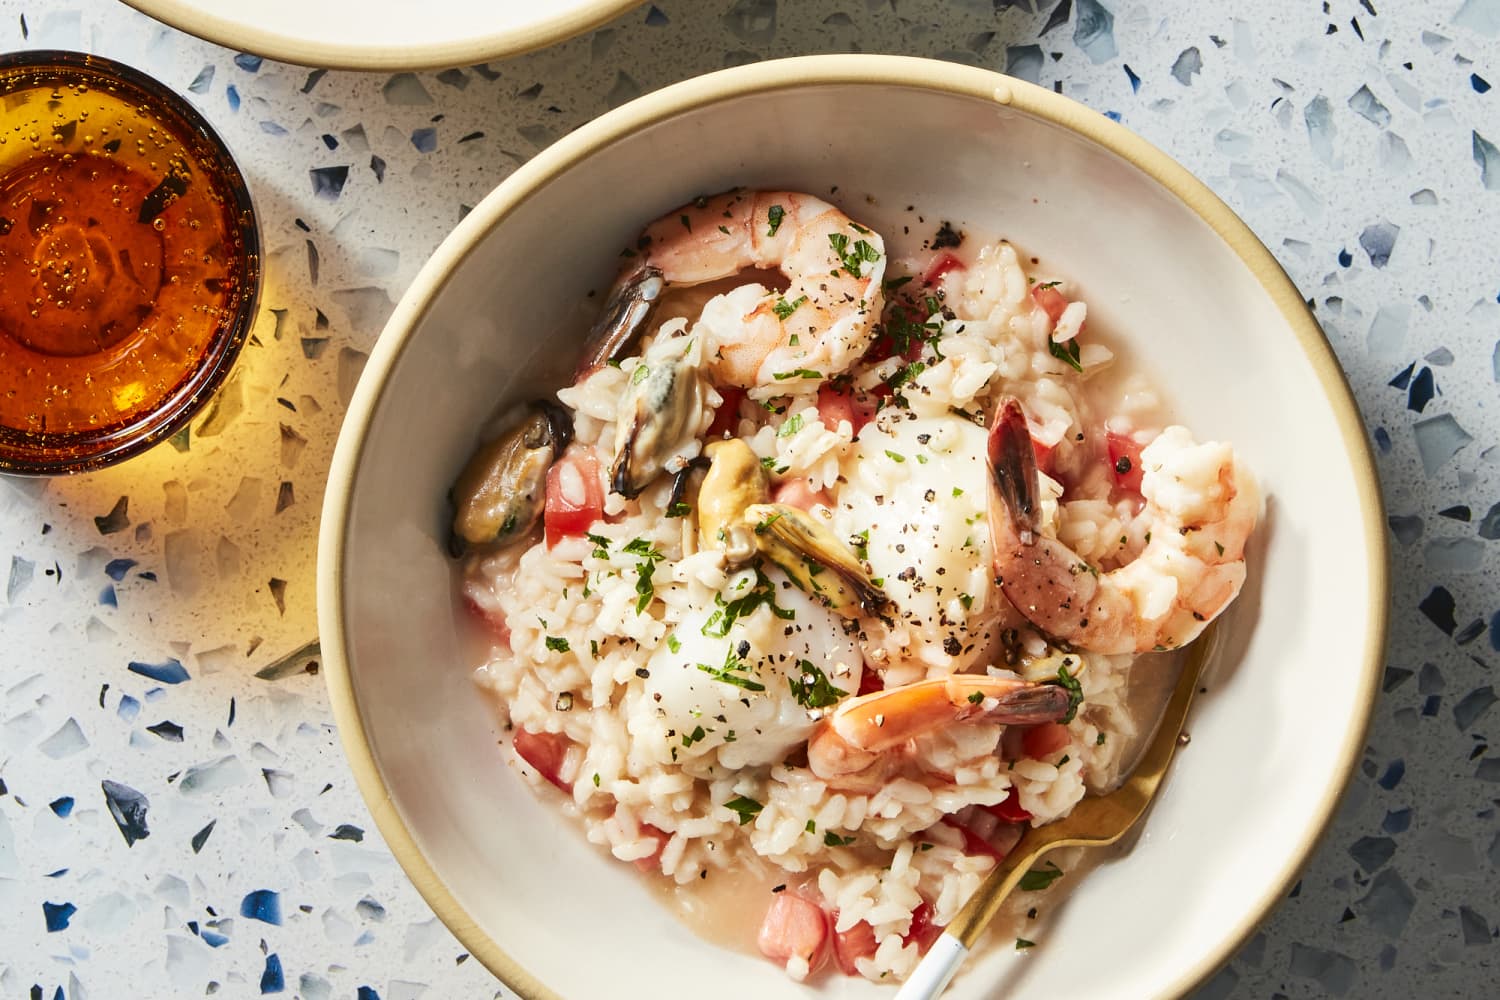 Tips for the Perfect Risotto